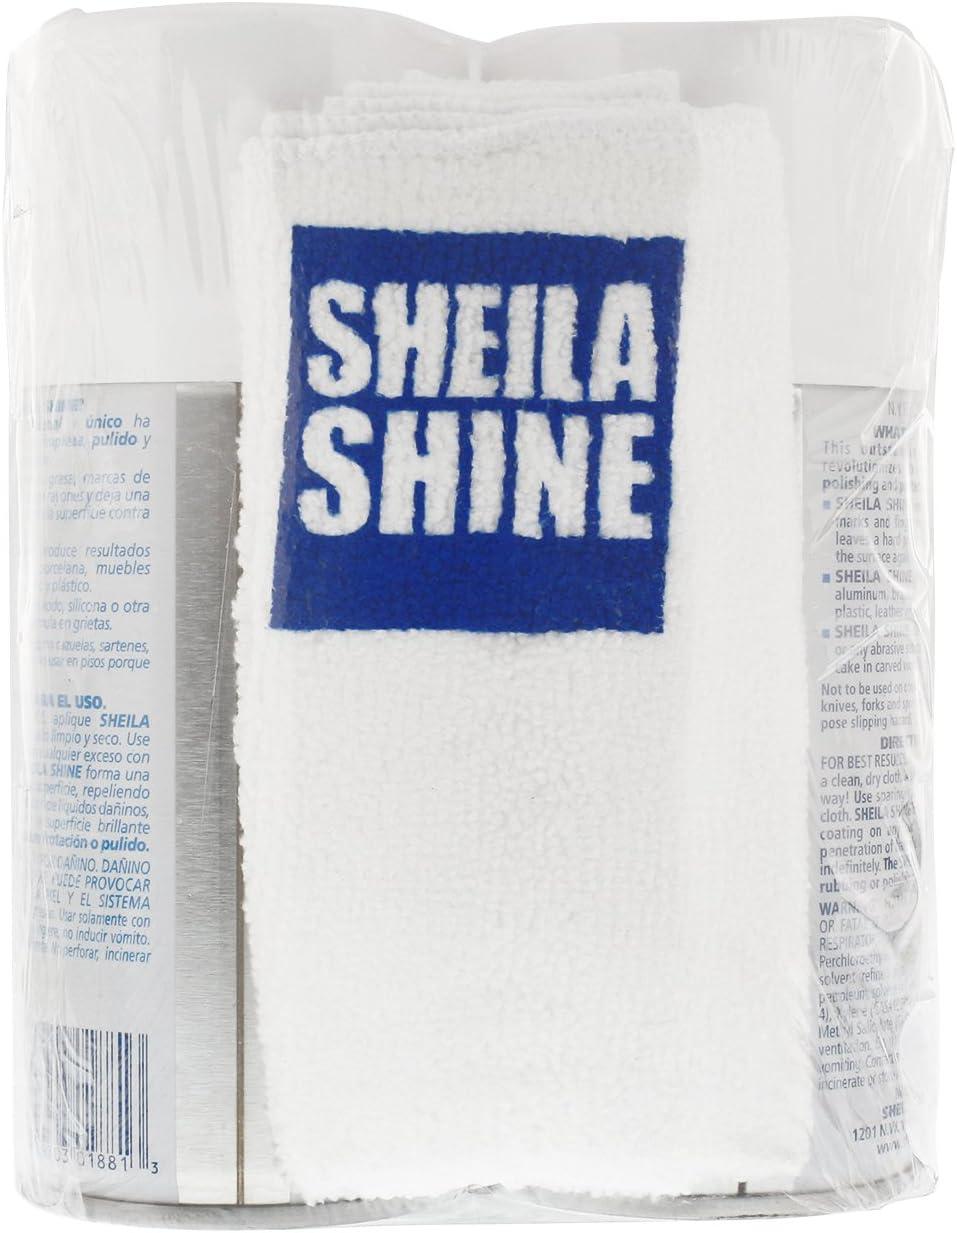 Sheila Shine Stainless Steel Polish & Cleaner